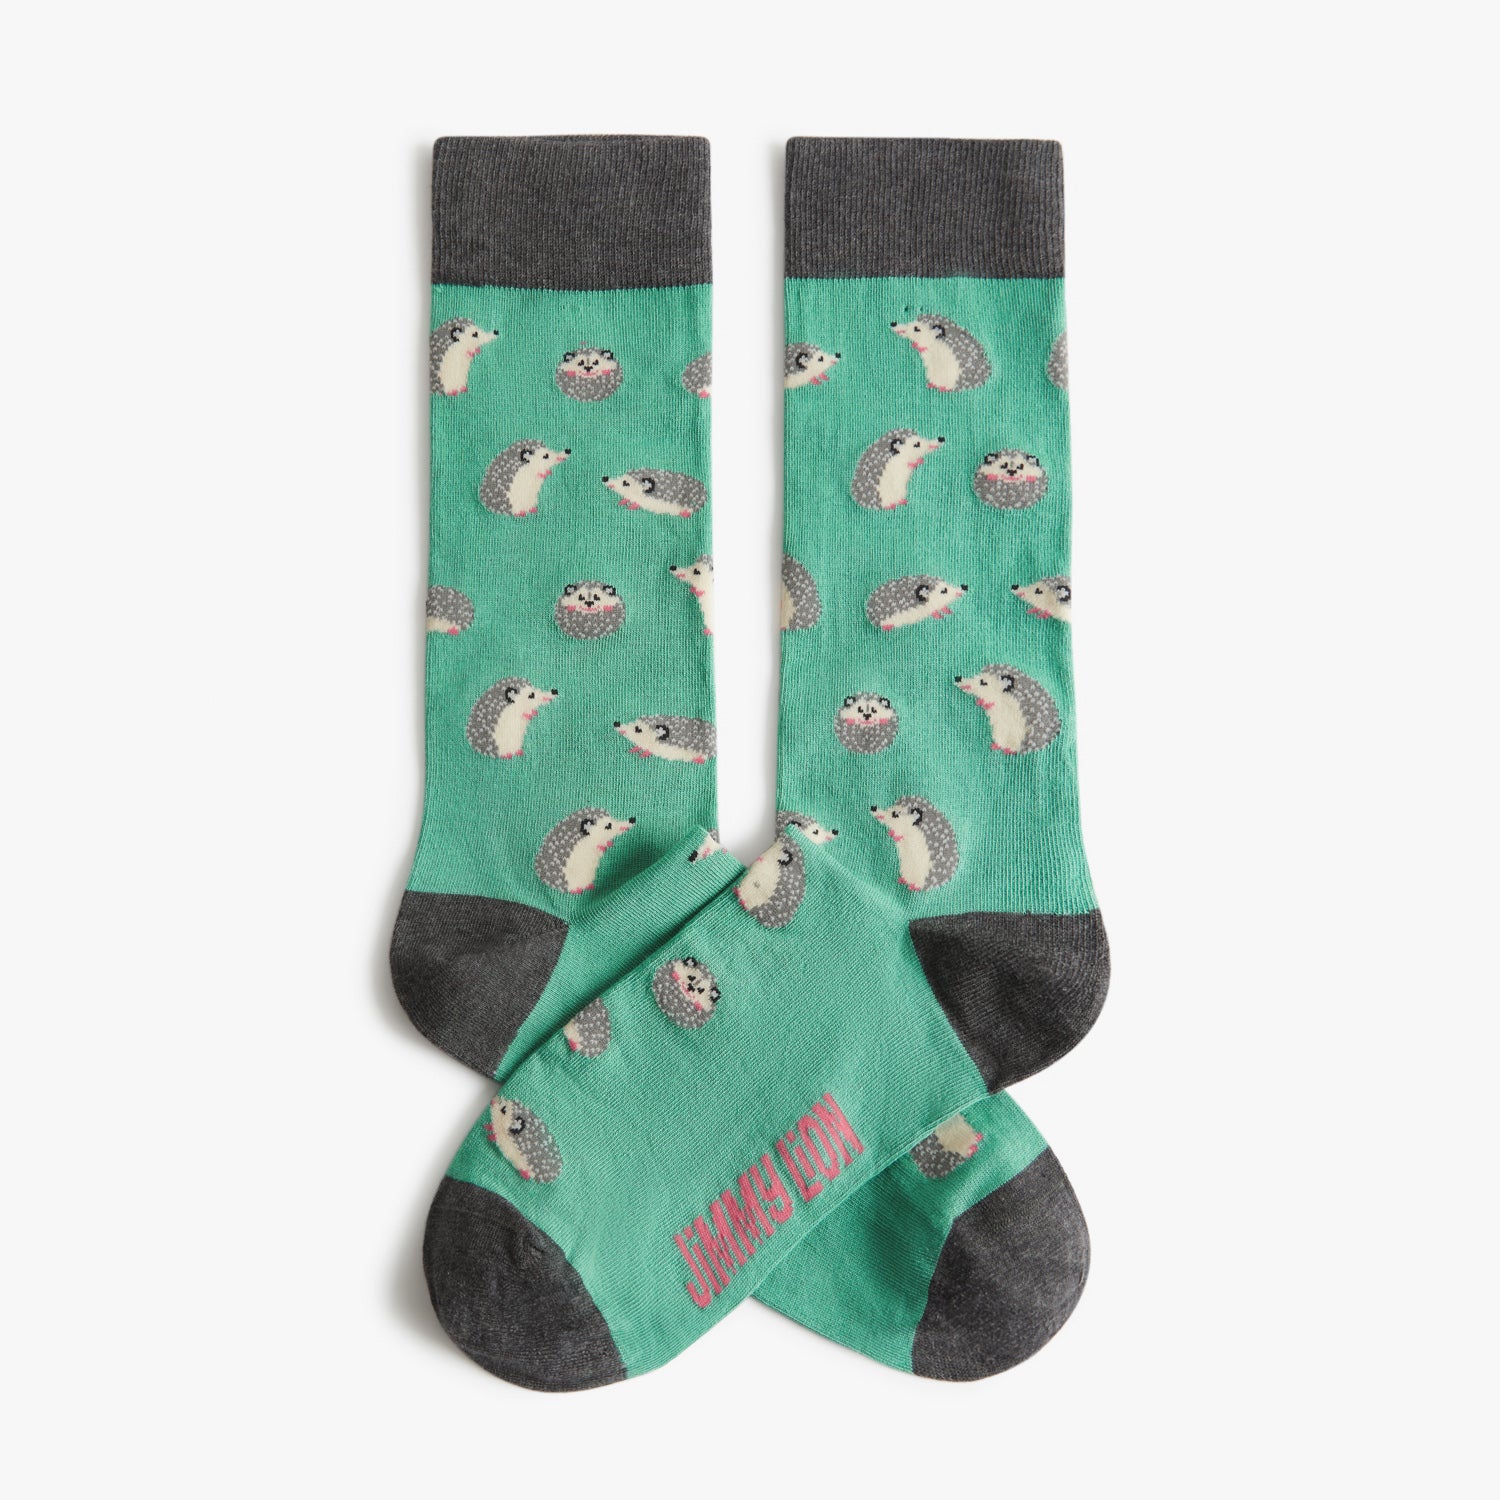 Jimmy Lion - Hello Friends! Just a few hours left!! Kicking off BlackFriday  at jimmylion.com this midnight. 25% off on ALL our socks. Don't miss our  biggest sale of the year! 🚀 #